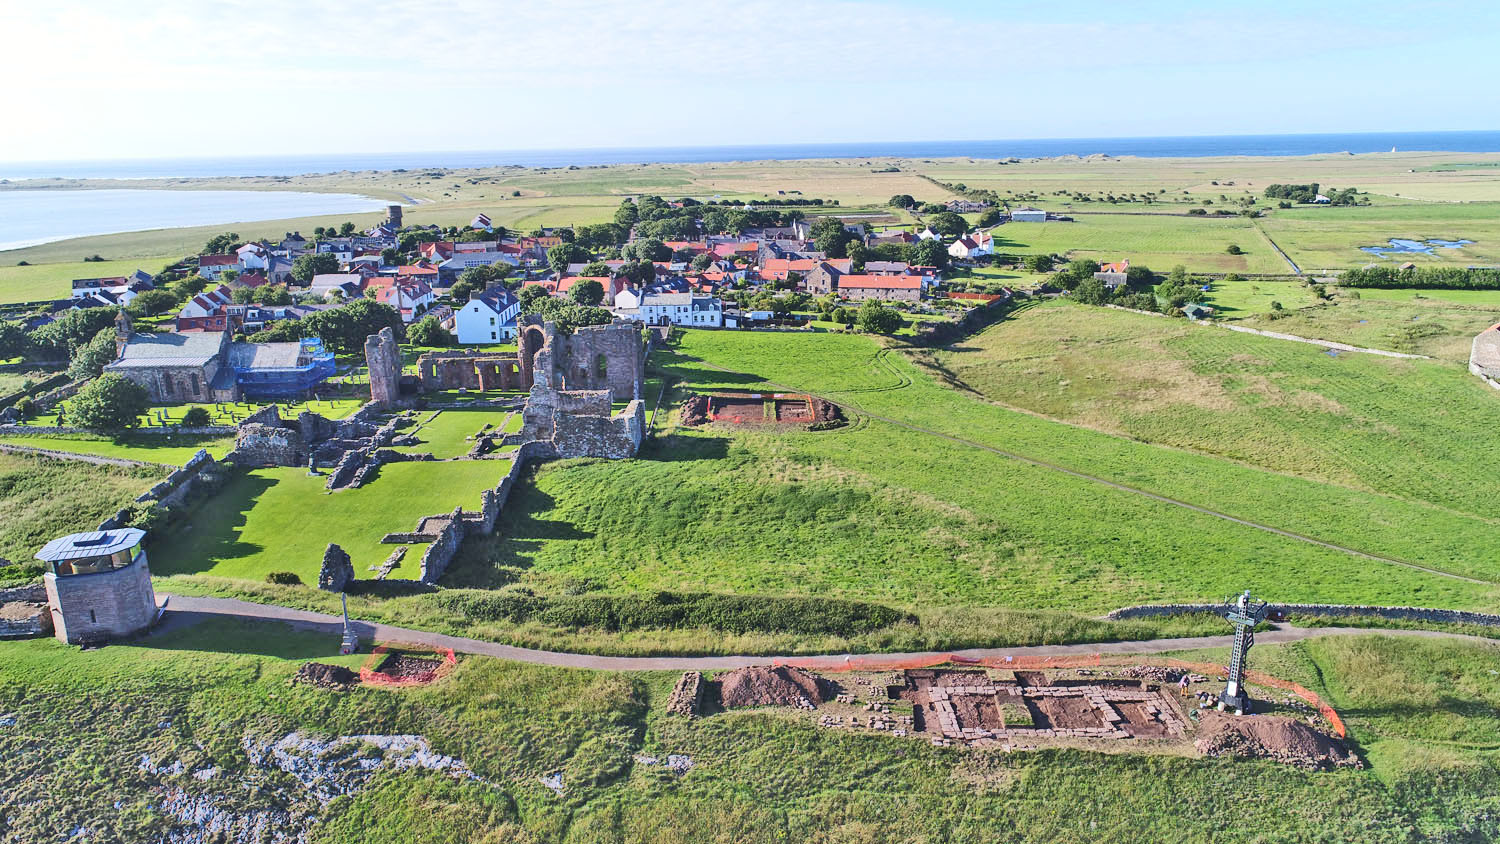 Summer season of community archaeology has revealed more tantalising insights into Holy Island’s past.